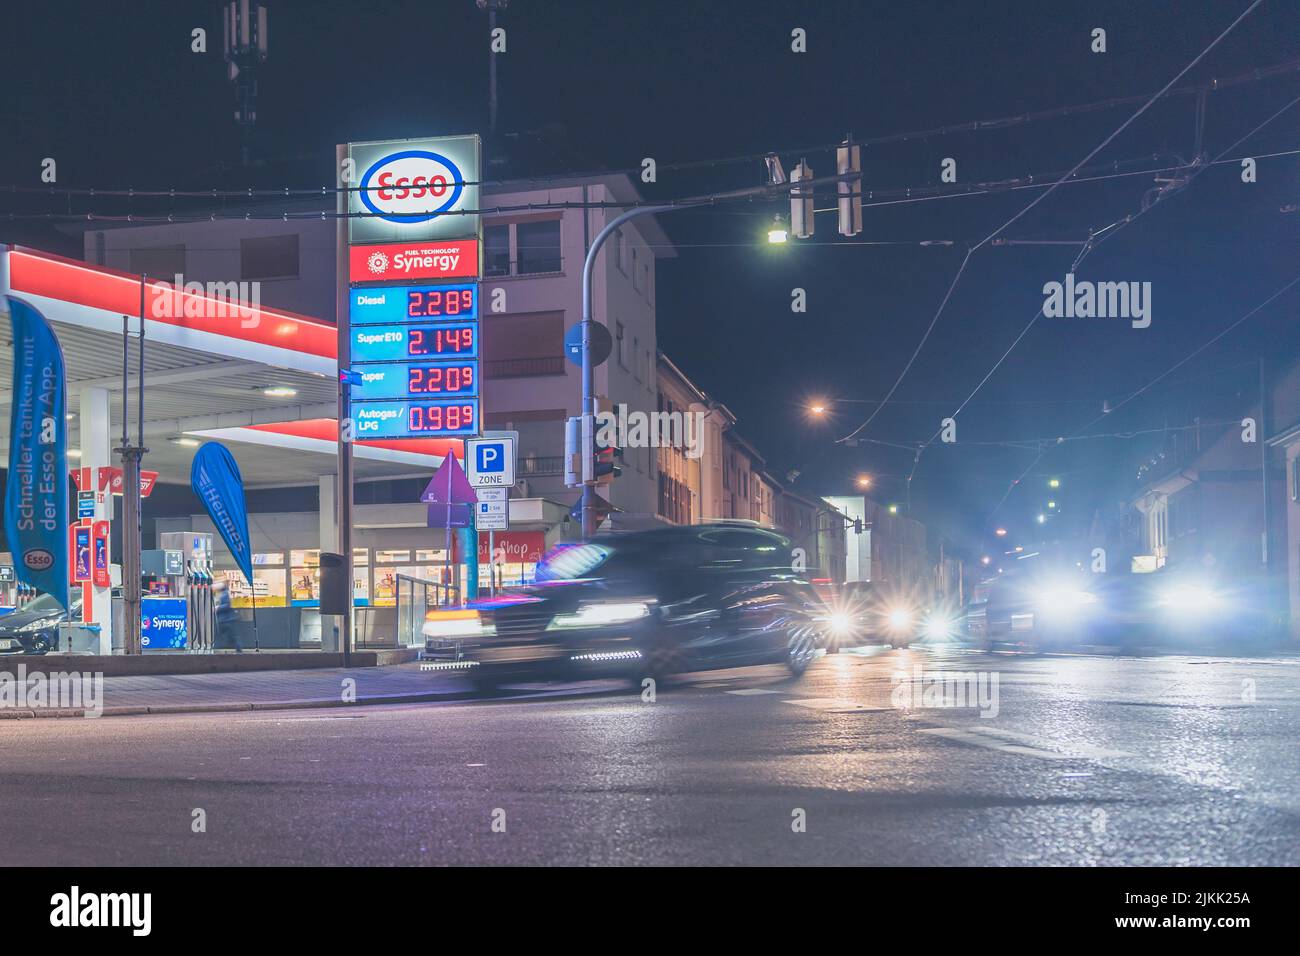 A shot of Esso gas station illuminated by traffic lights at night in Heidelberg, Germany Stock Photo